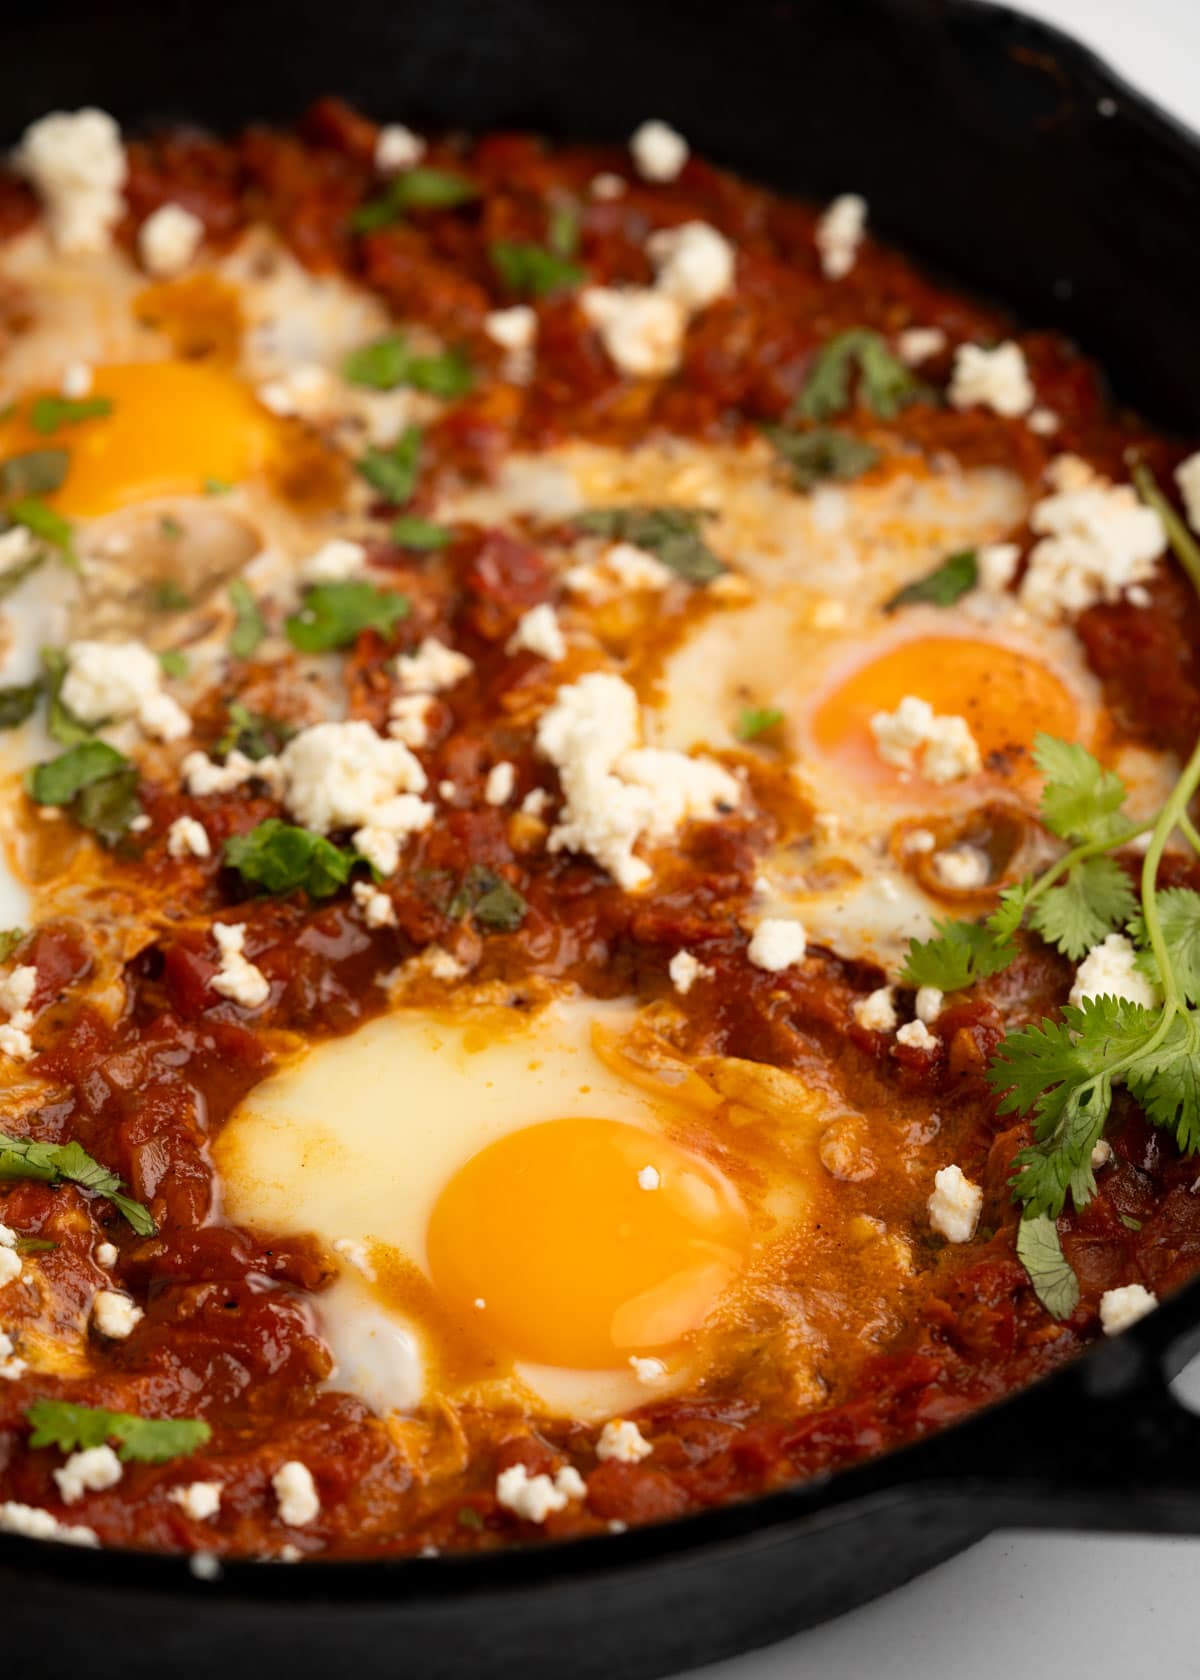 Eggs poached in spiced tomato sauce and topped with crumbled feta.